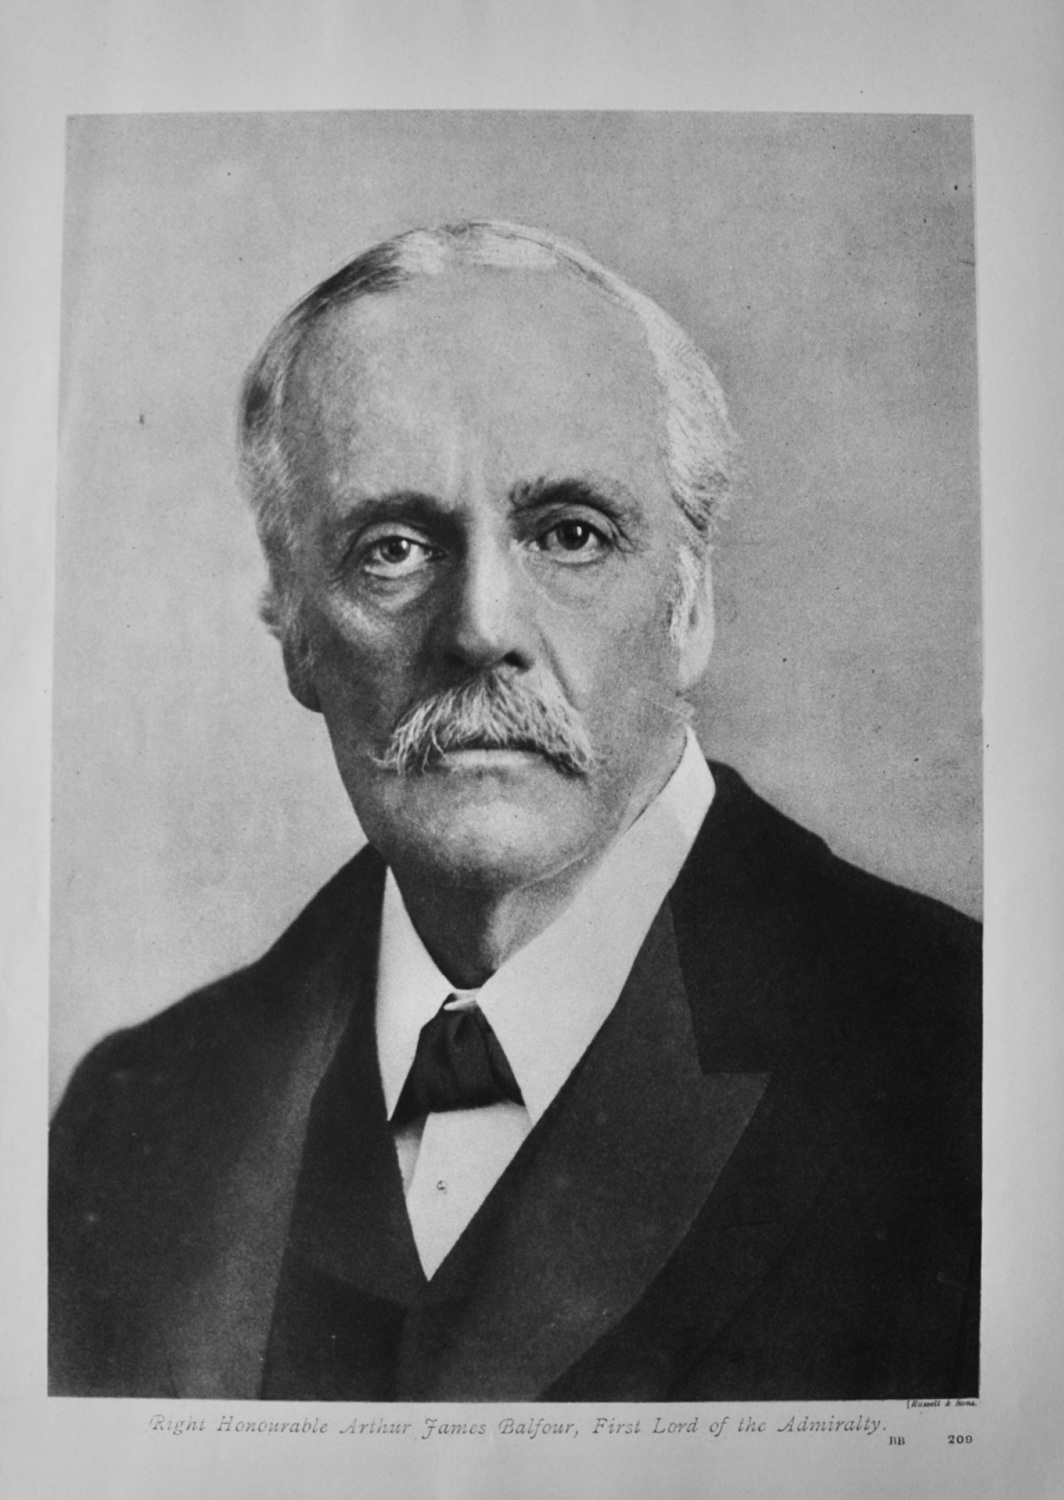 Right Honourable Arthur James Balfour, First Lord of the Admiralty.  (1914 